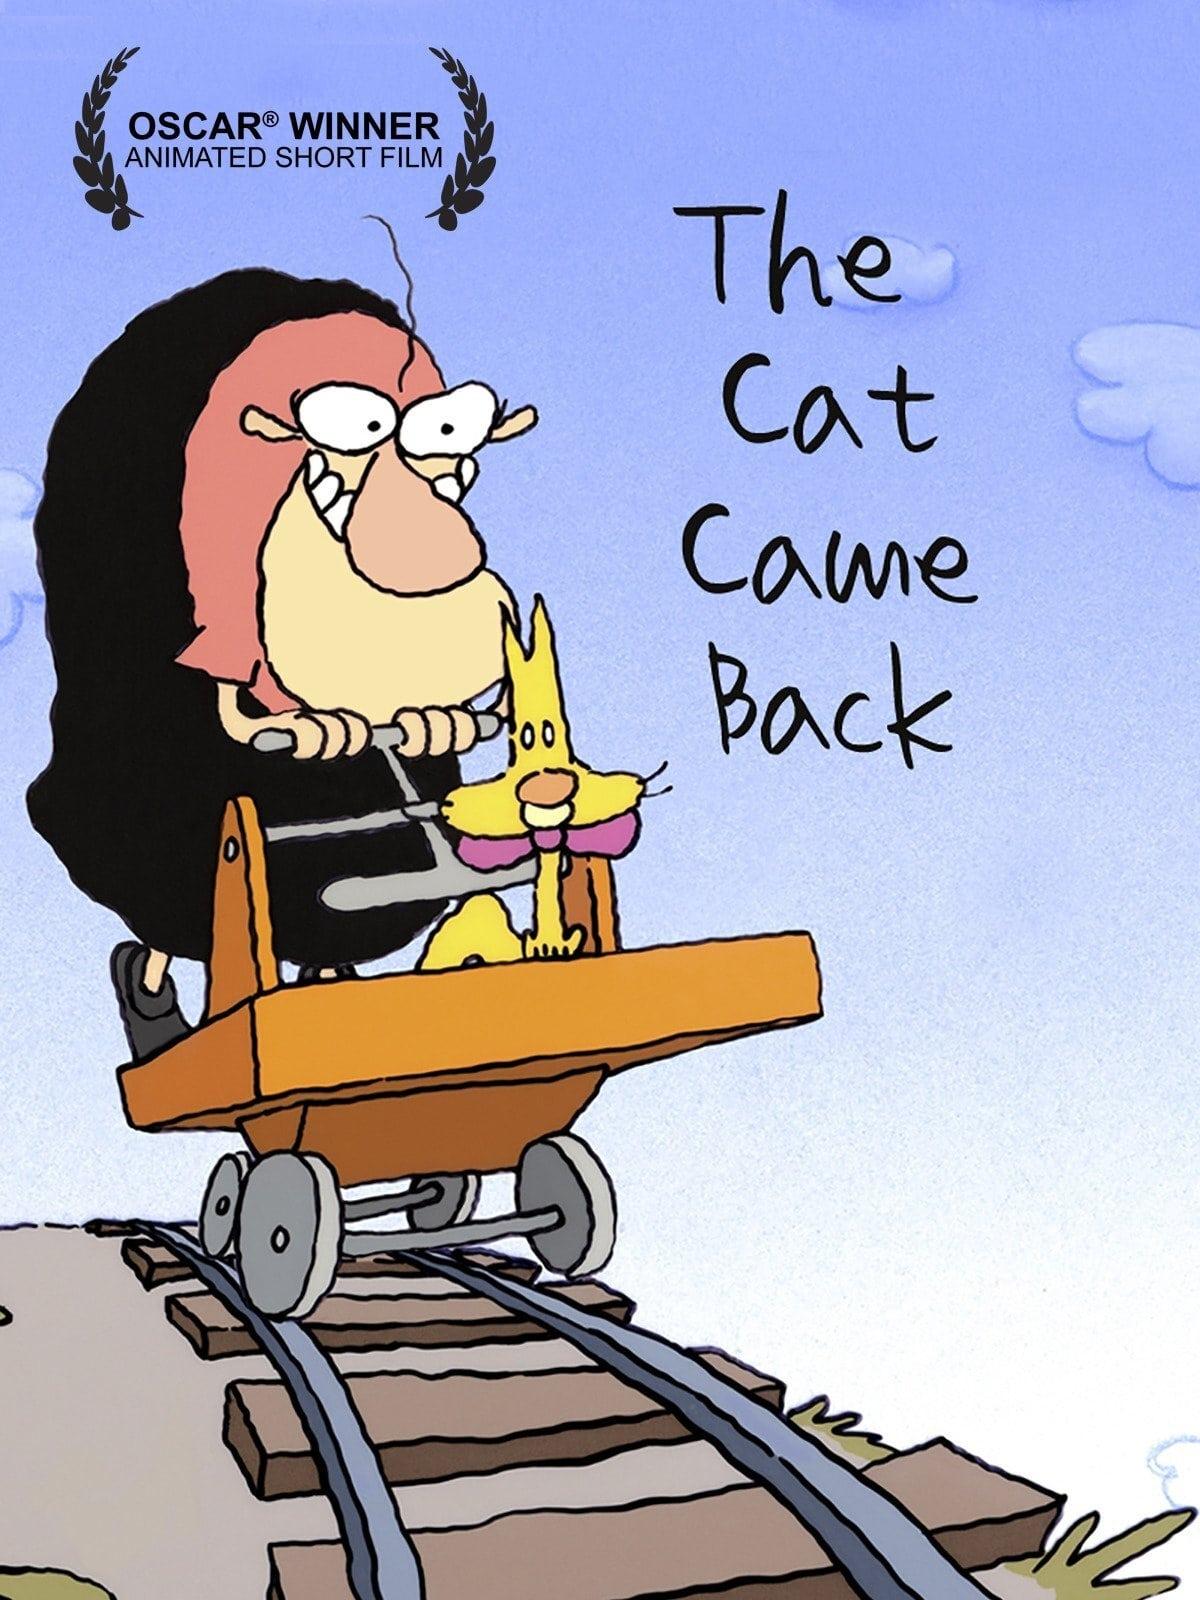 The Cat Came Back poster